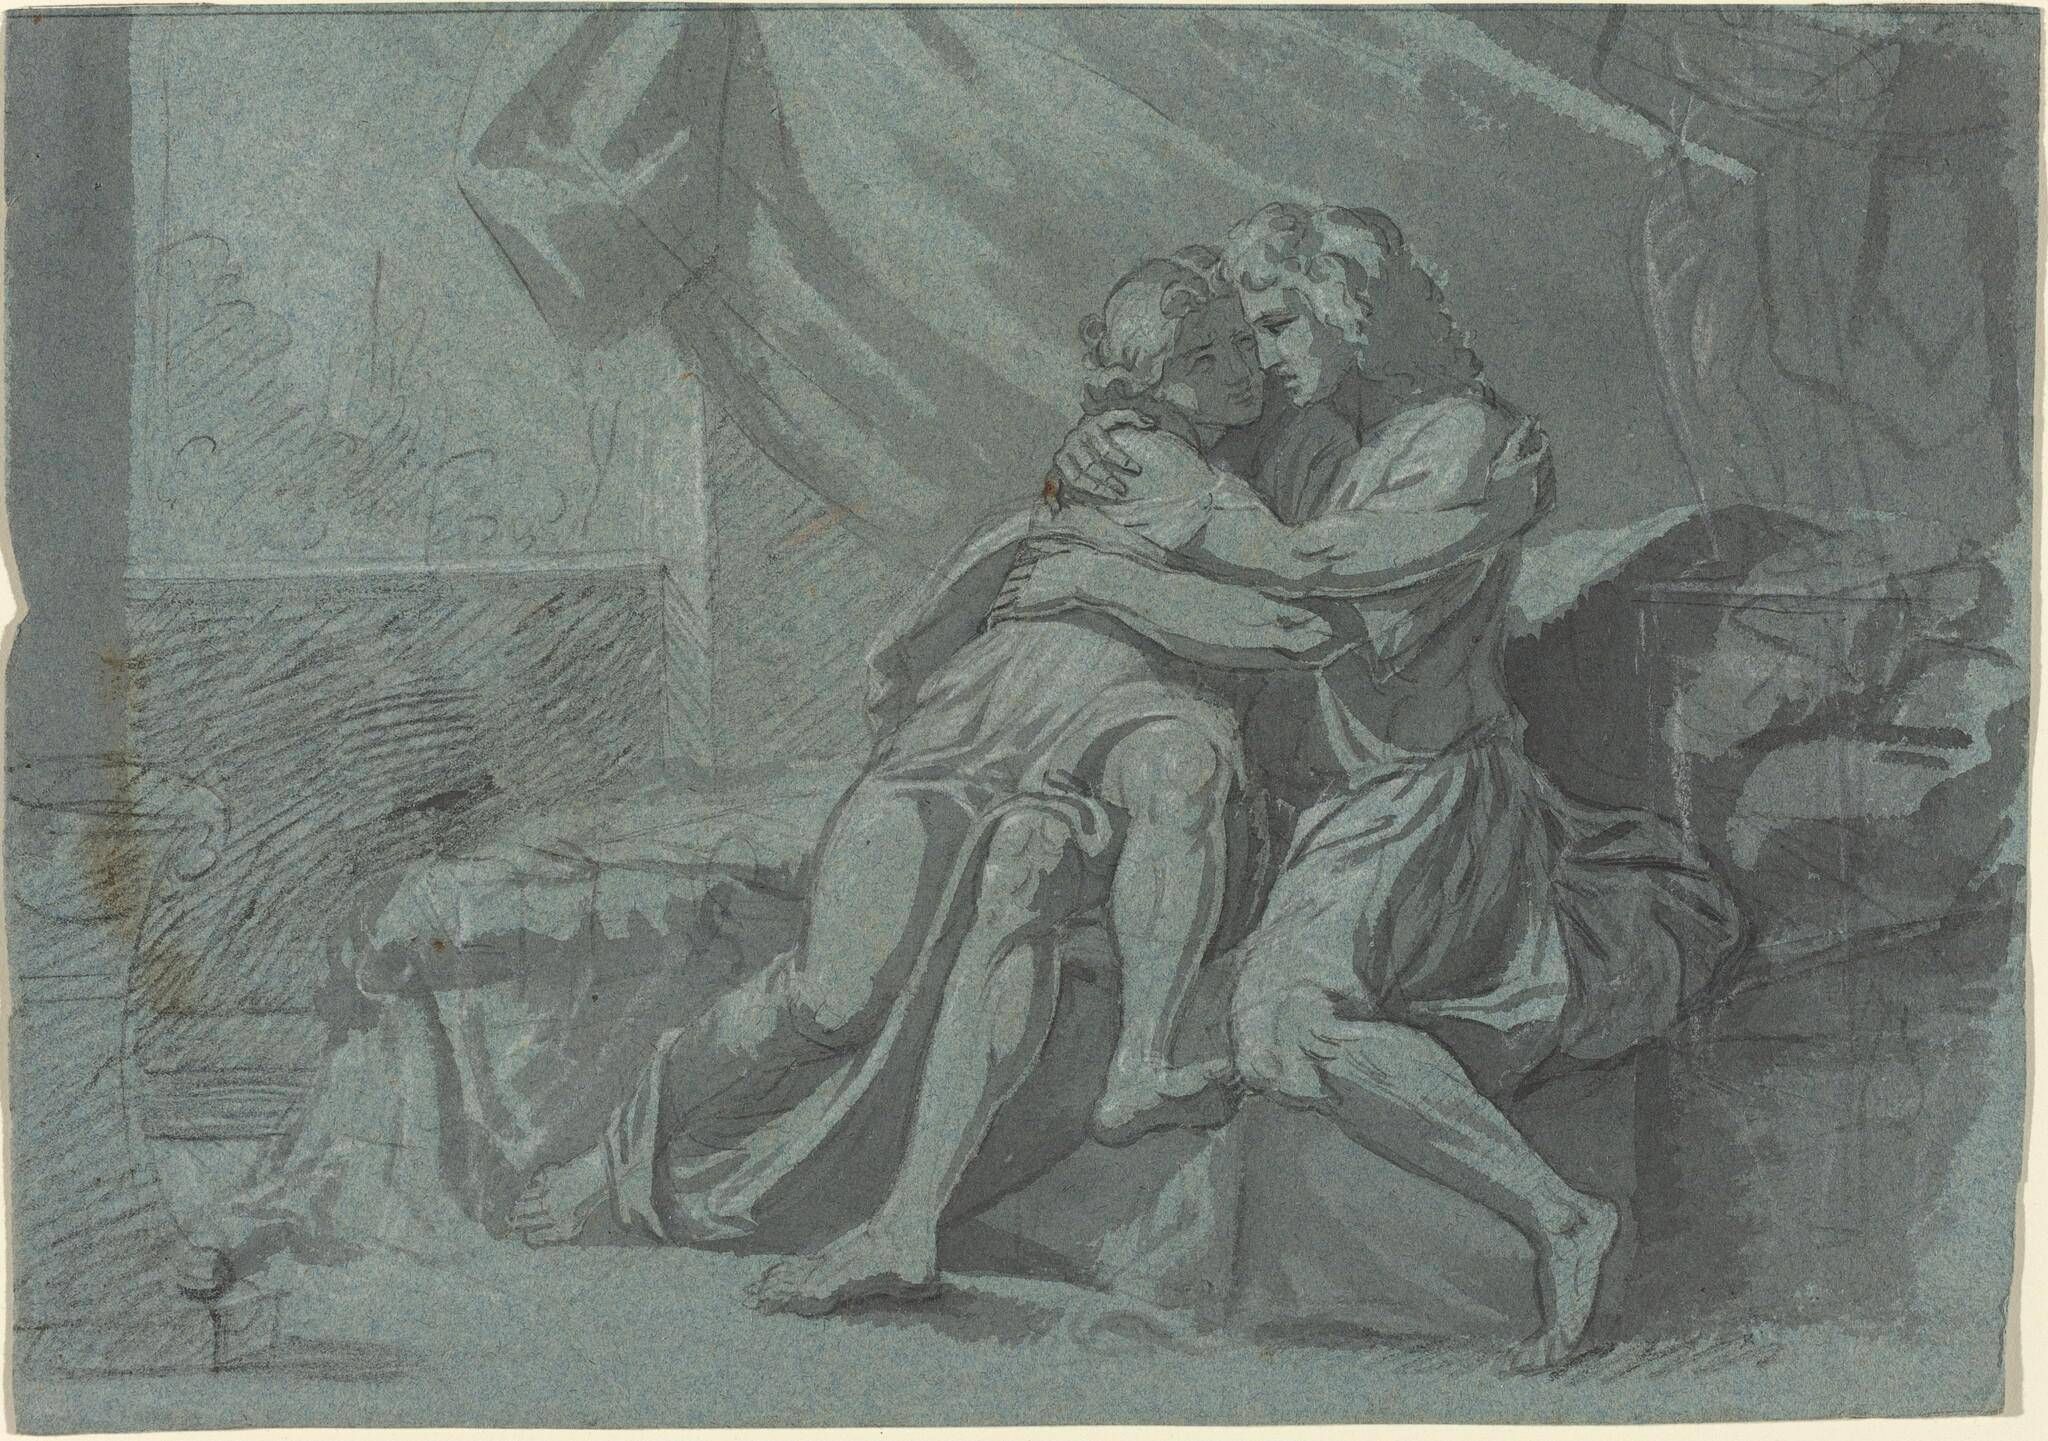 Embracing Lovers in Classical Dress / A Woman in Classical Dress Looking Up